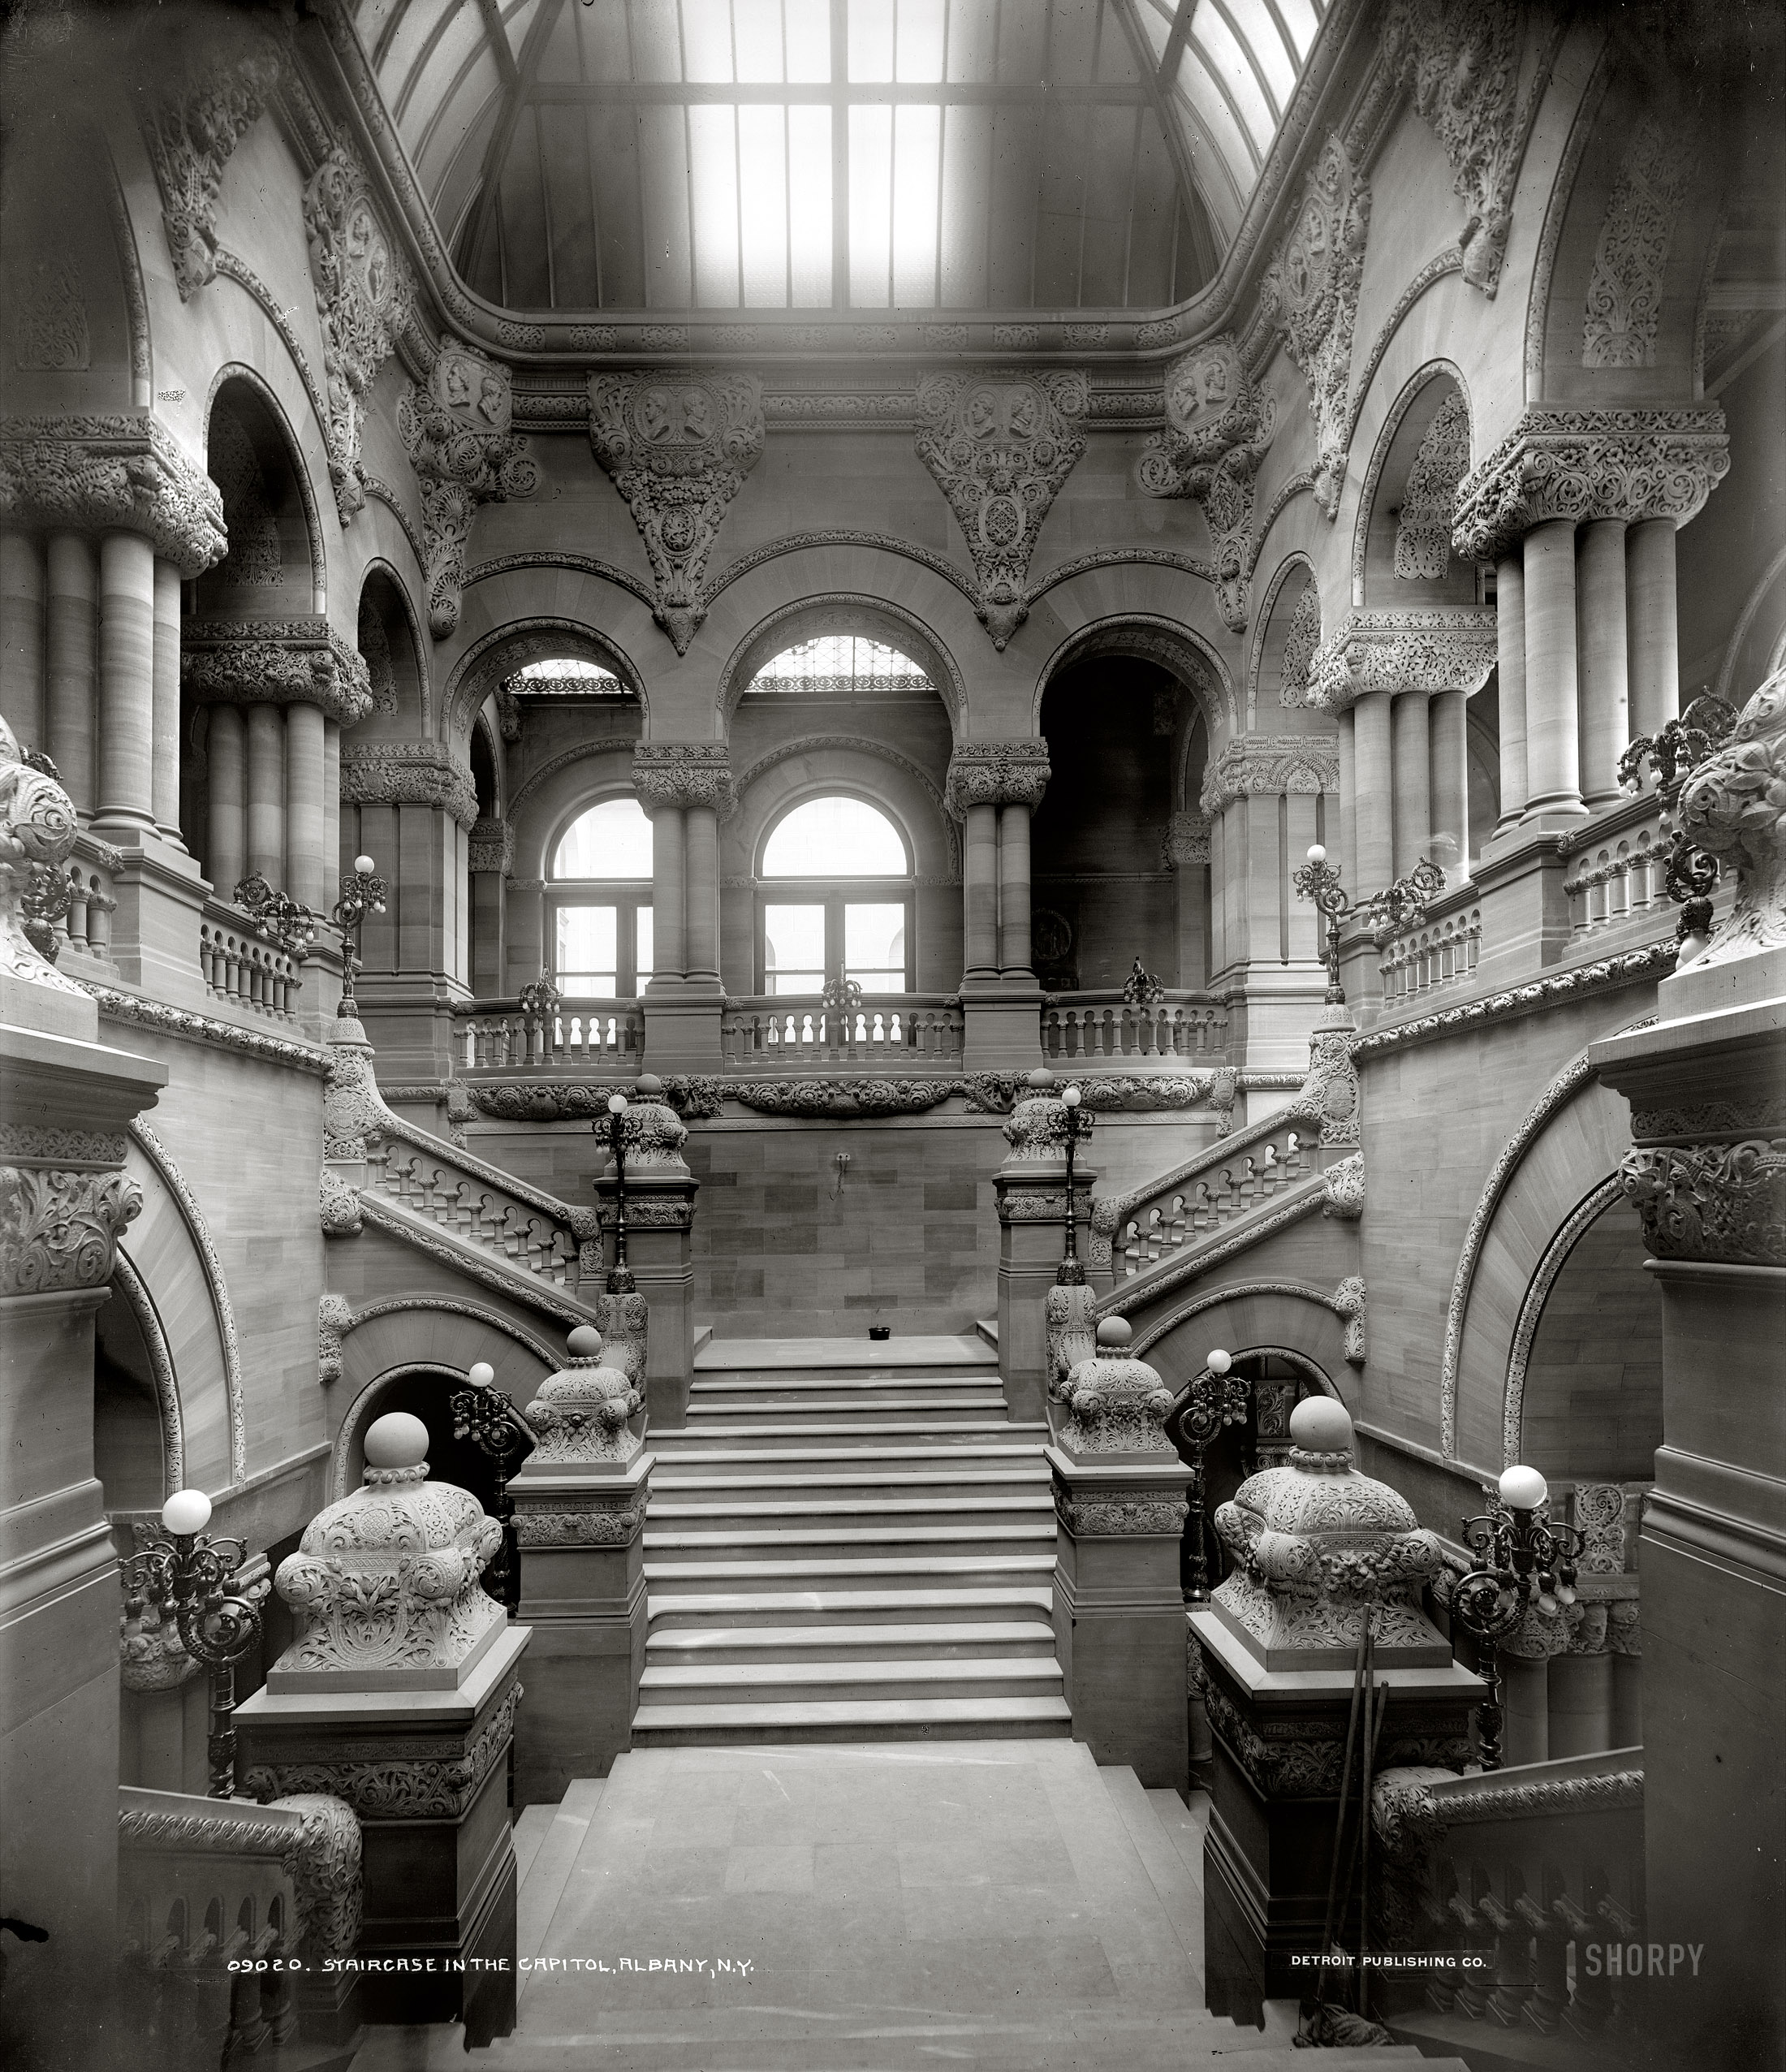 Albany, New York, circa 1905. "Staircase in the Capitol." A glimpse into the corridors of power. Harris & Ewing Collection glass negative. View full size.